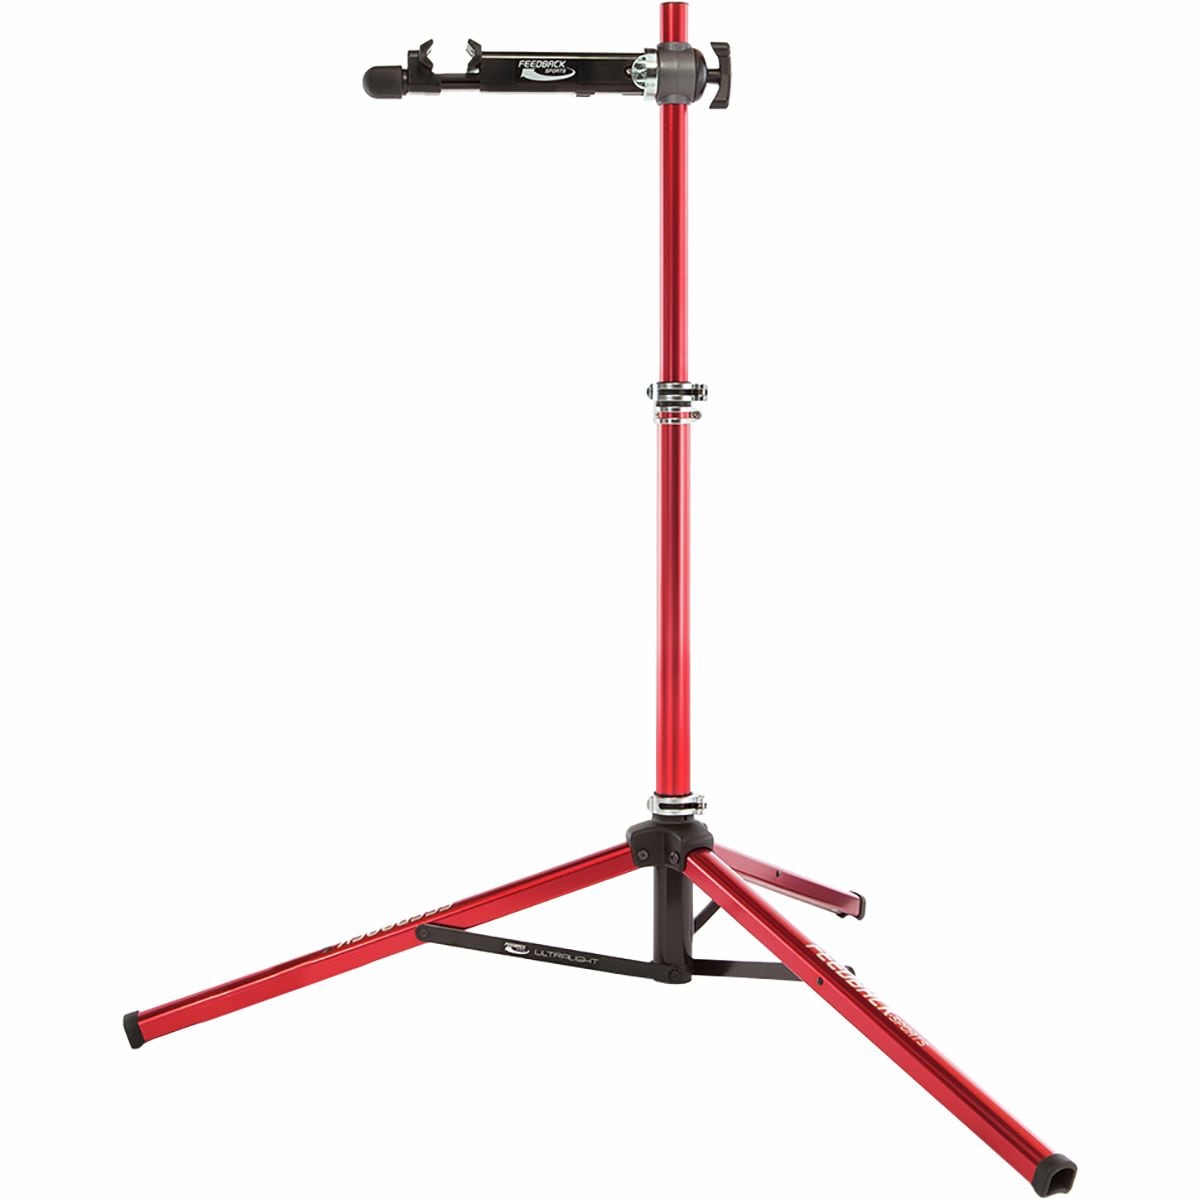 Feedback Sports Pro Ultralight Bicycle Repair Stand